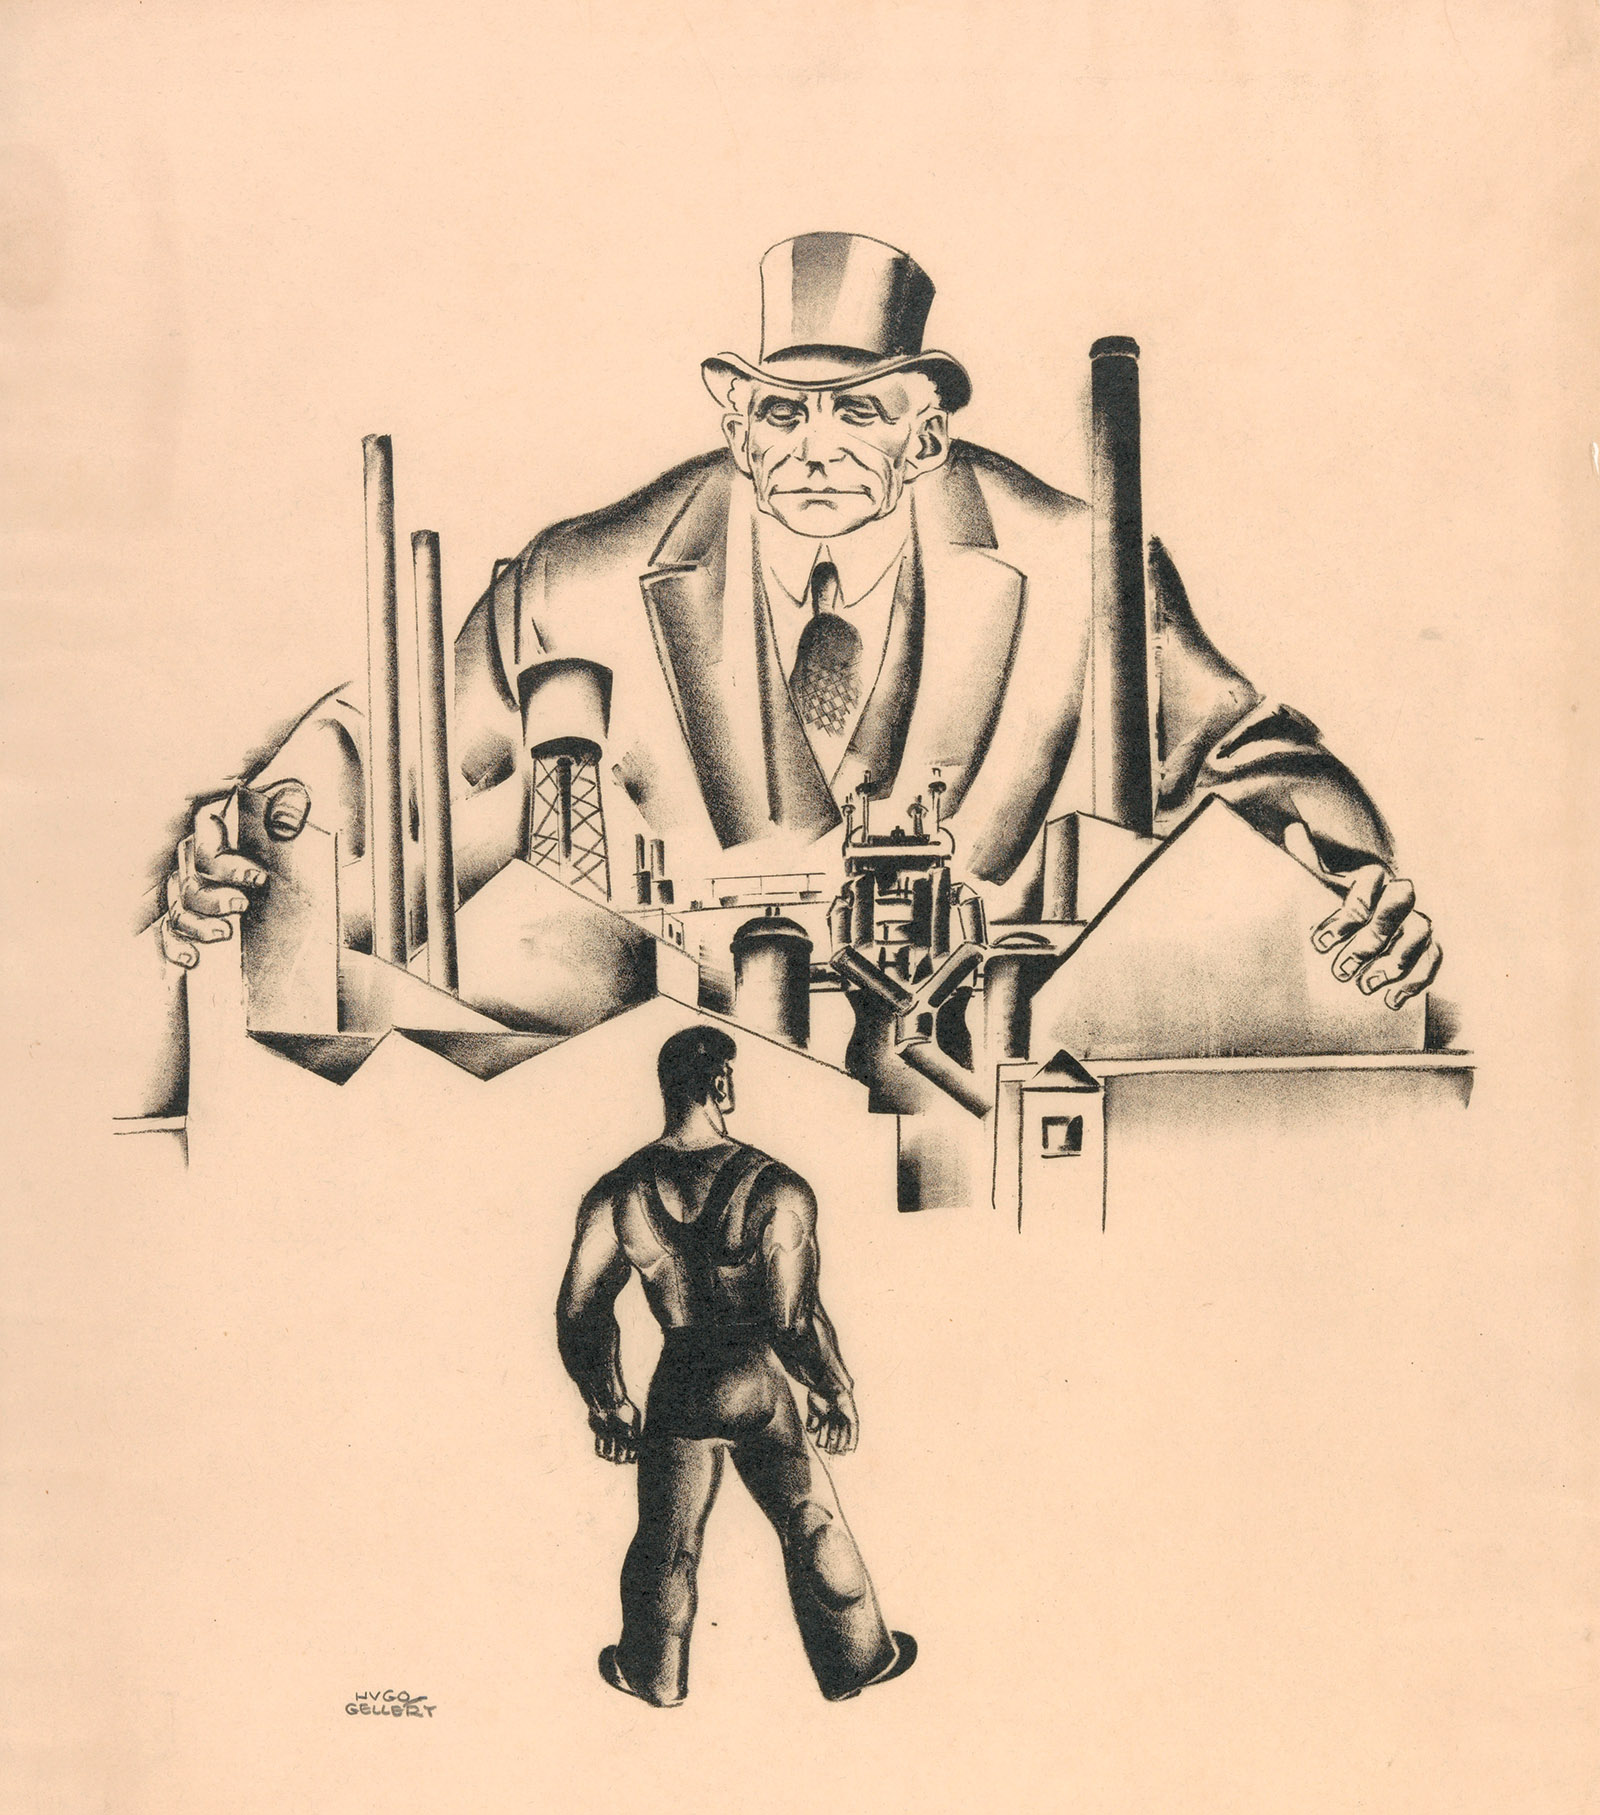 ‘Primary Accumulation 3 (Henry Ford)’; lithograph by Hugo Gellert, 1933